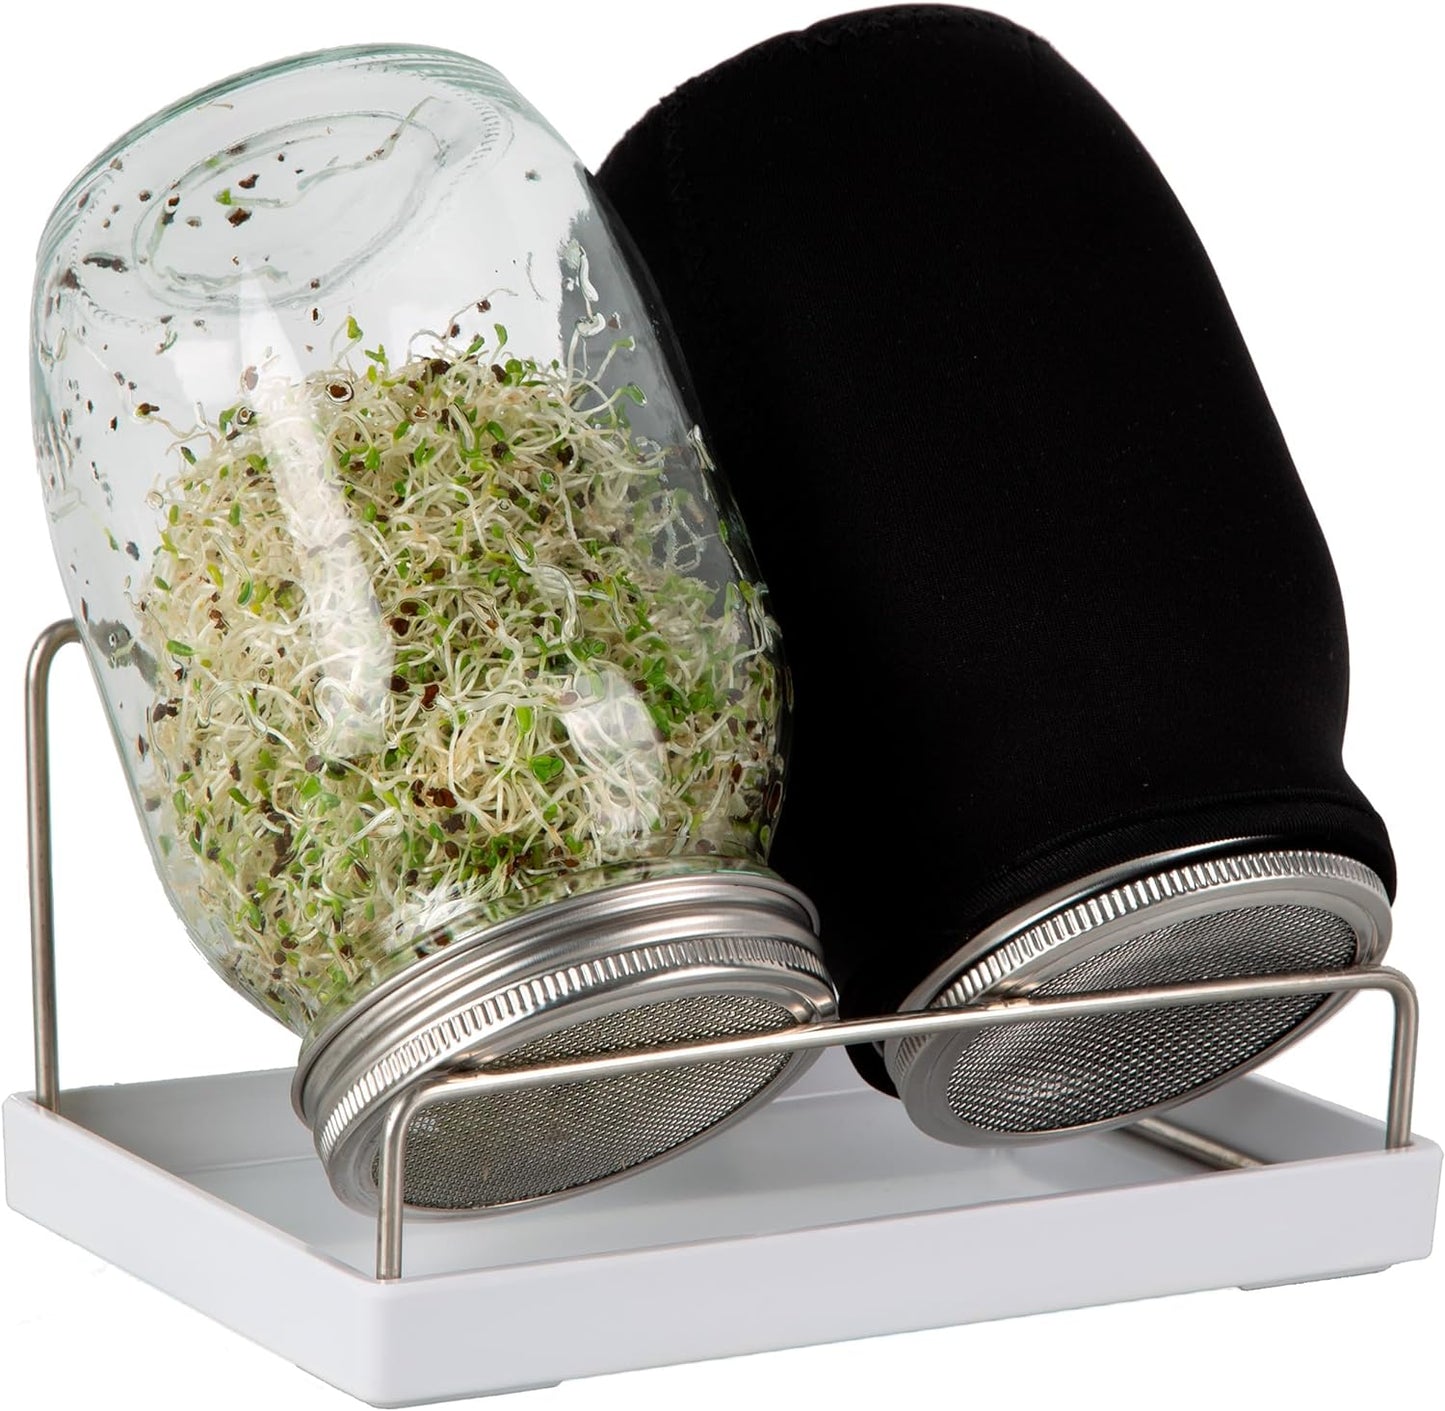 Sprouting Jar Kit, 2 Large Wide Mouth Sprouting Jars with Blackout Cover,